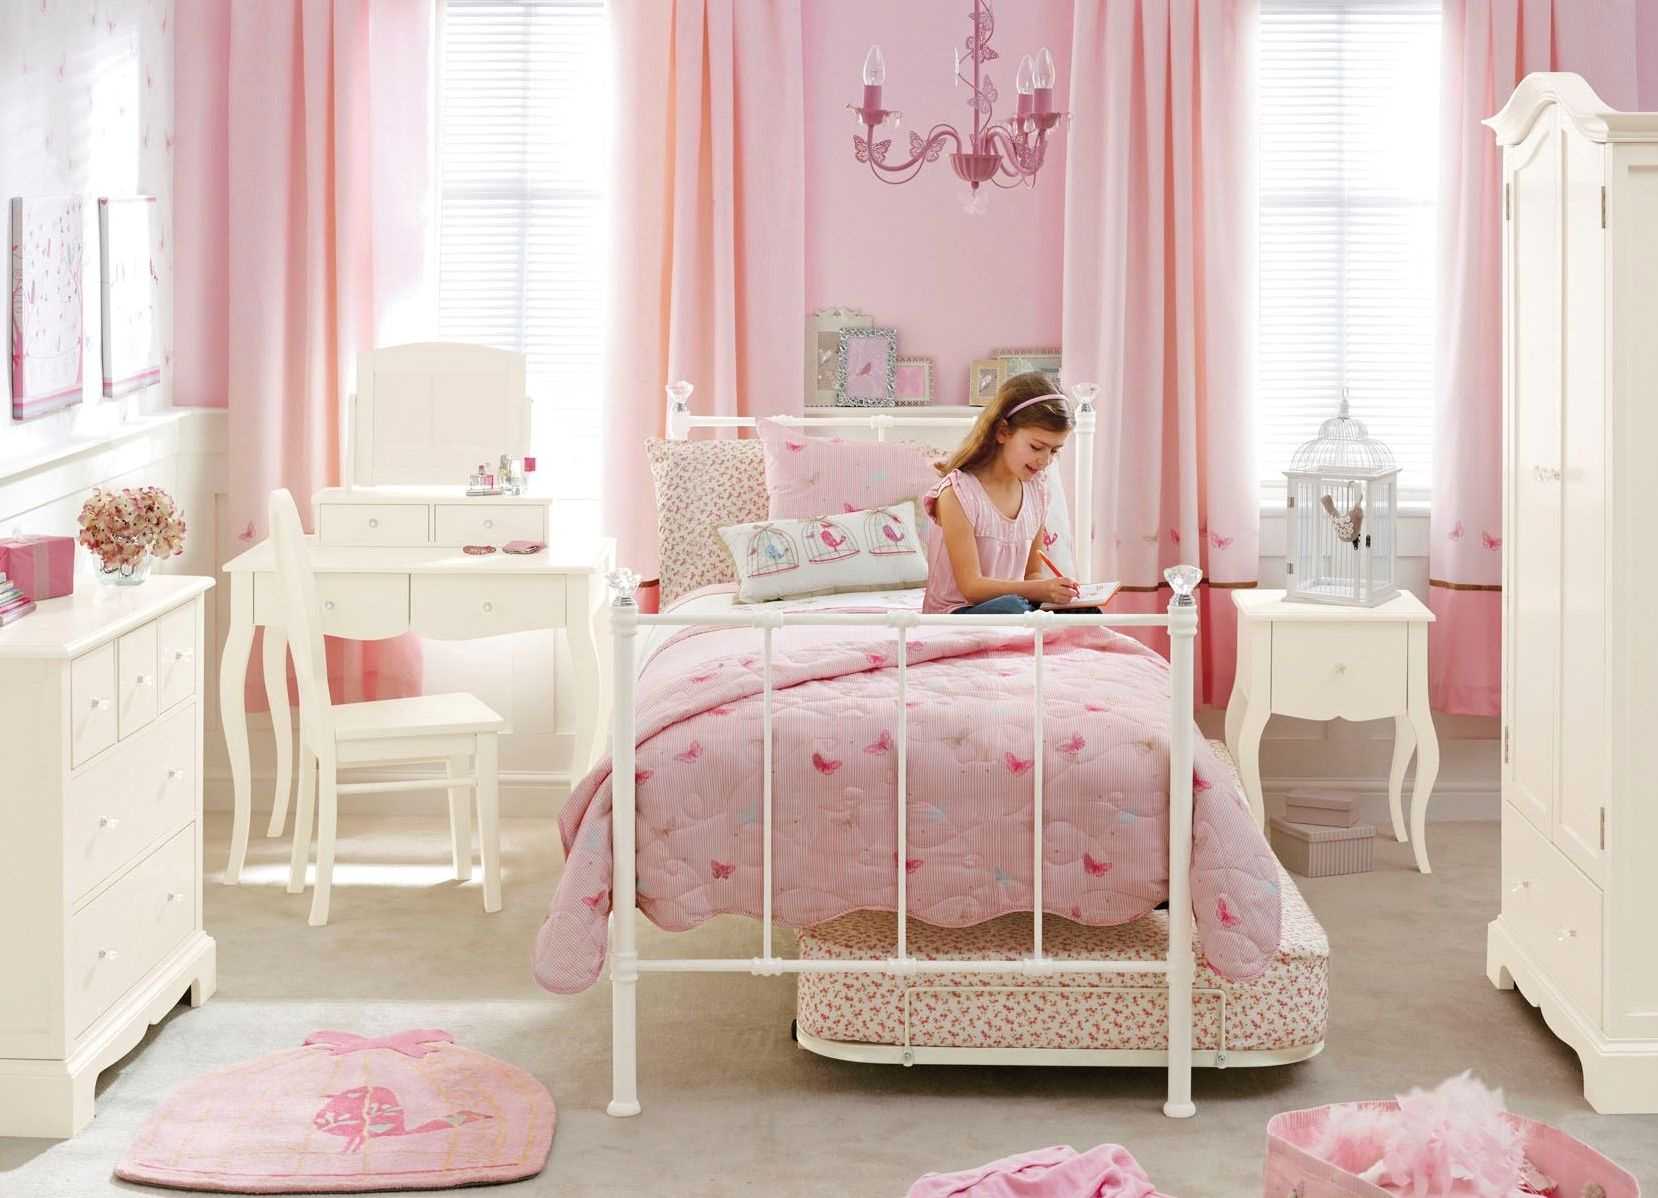 the idea of ​​a bright room design for a girl